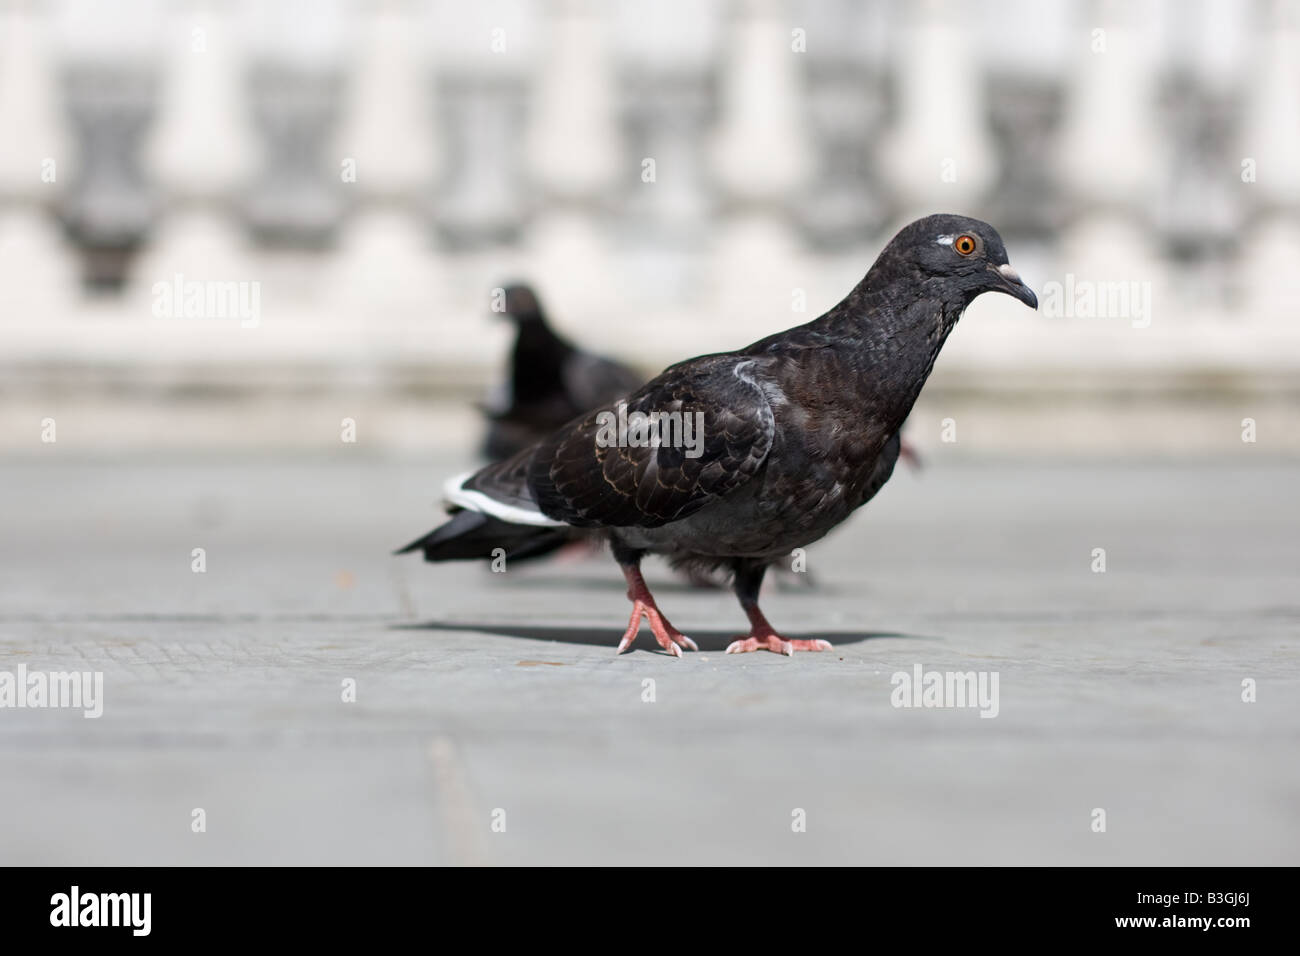 London feral pigeon with narrow depth of field Stock Photo